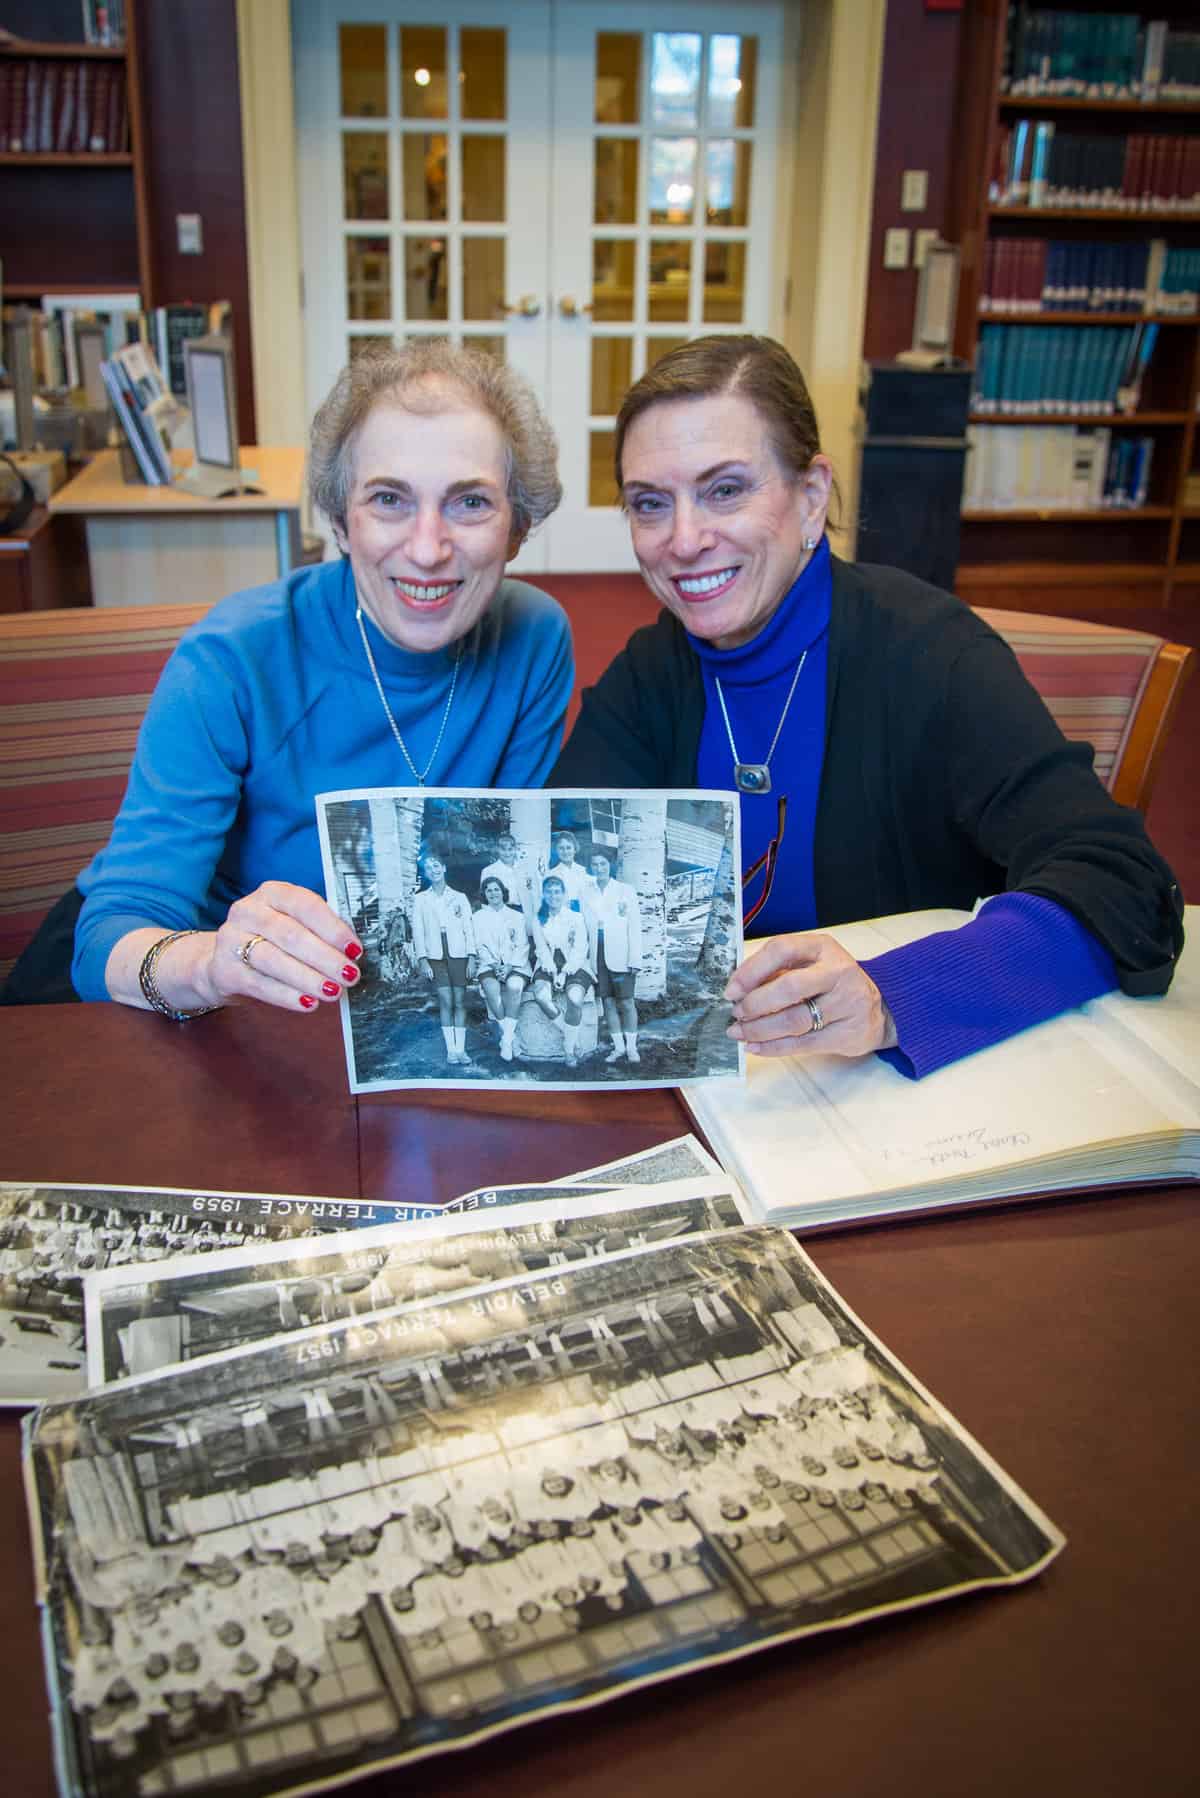 Rabbi Connie Golden and Leslie Legum with some treasured camp photos.